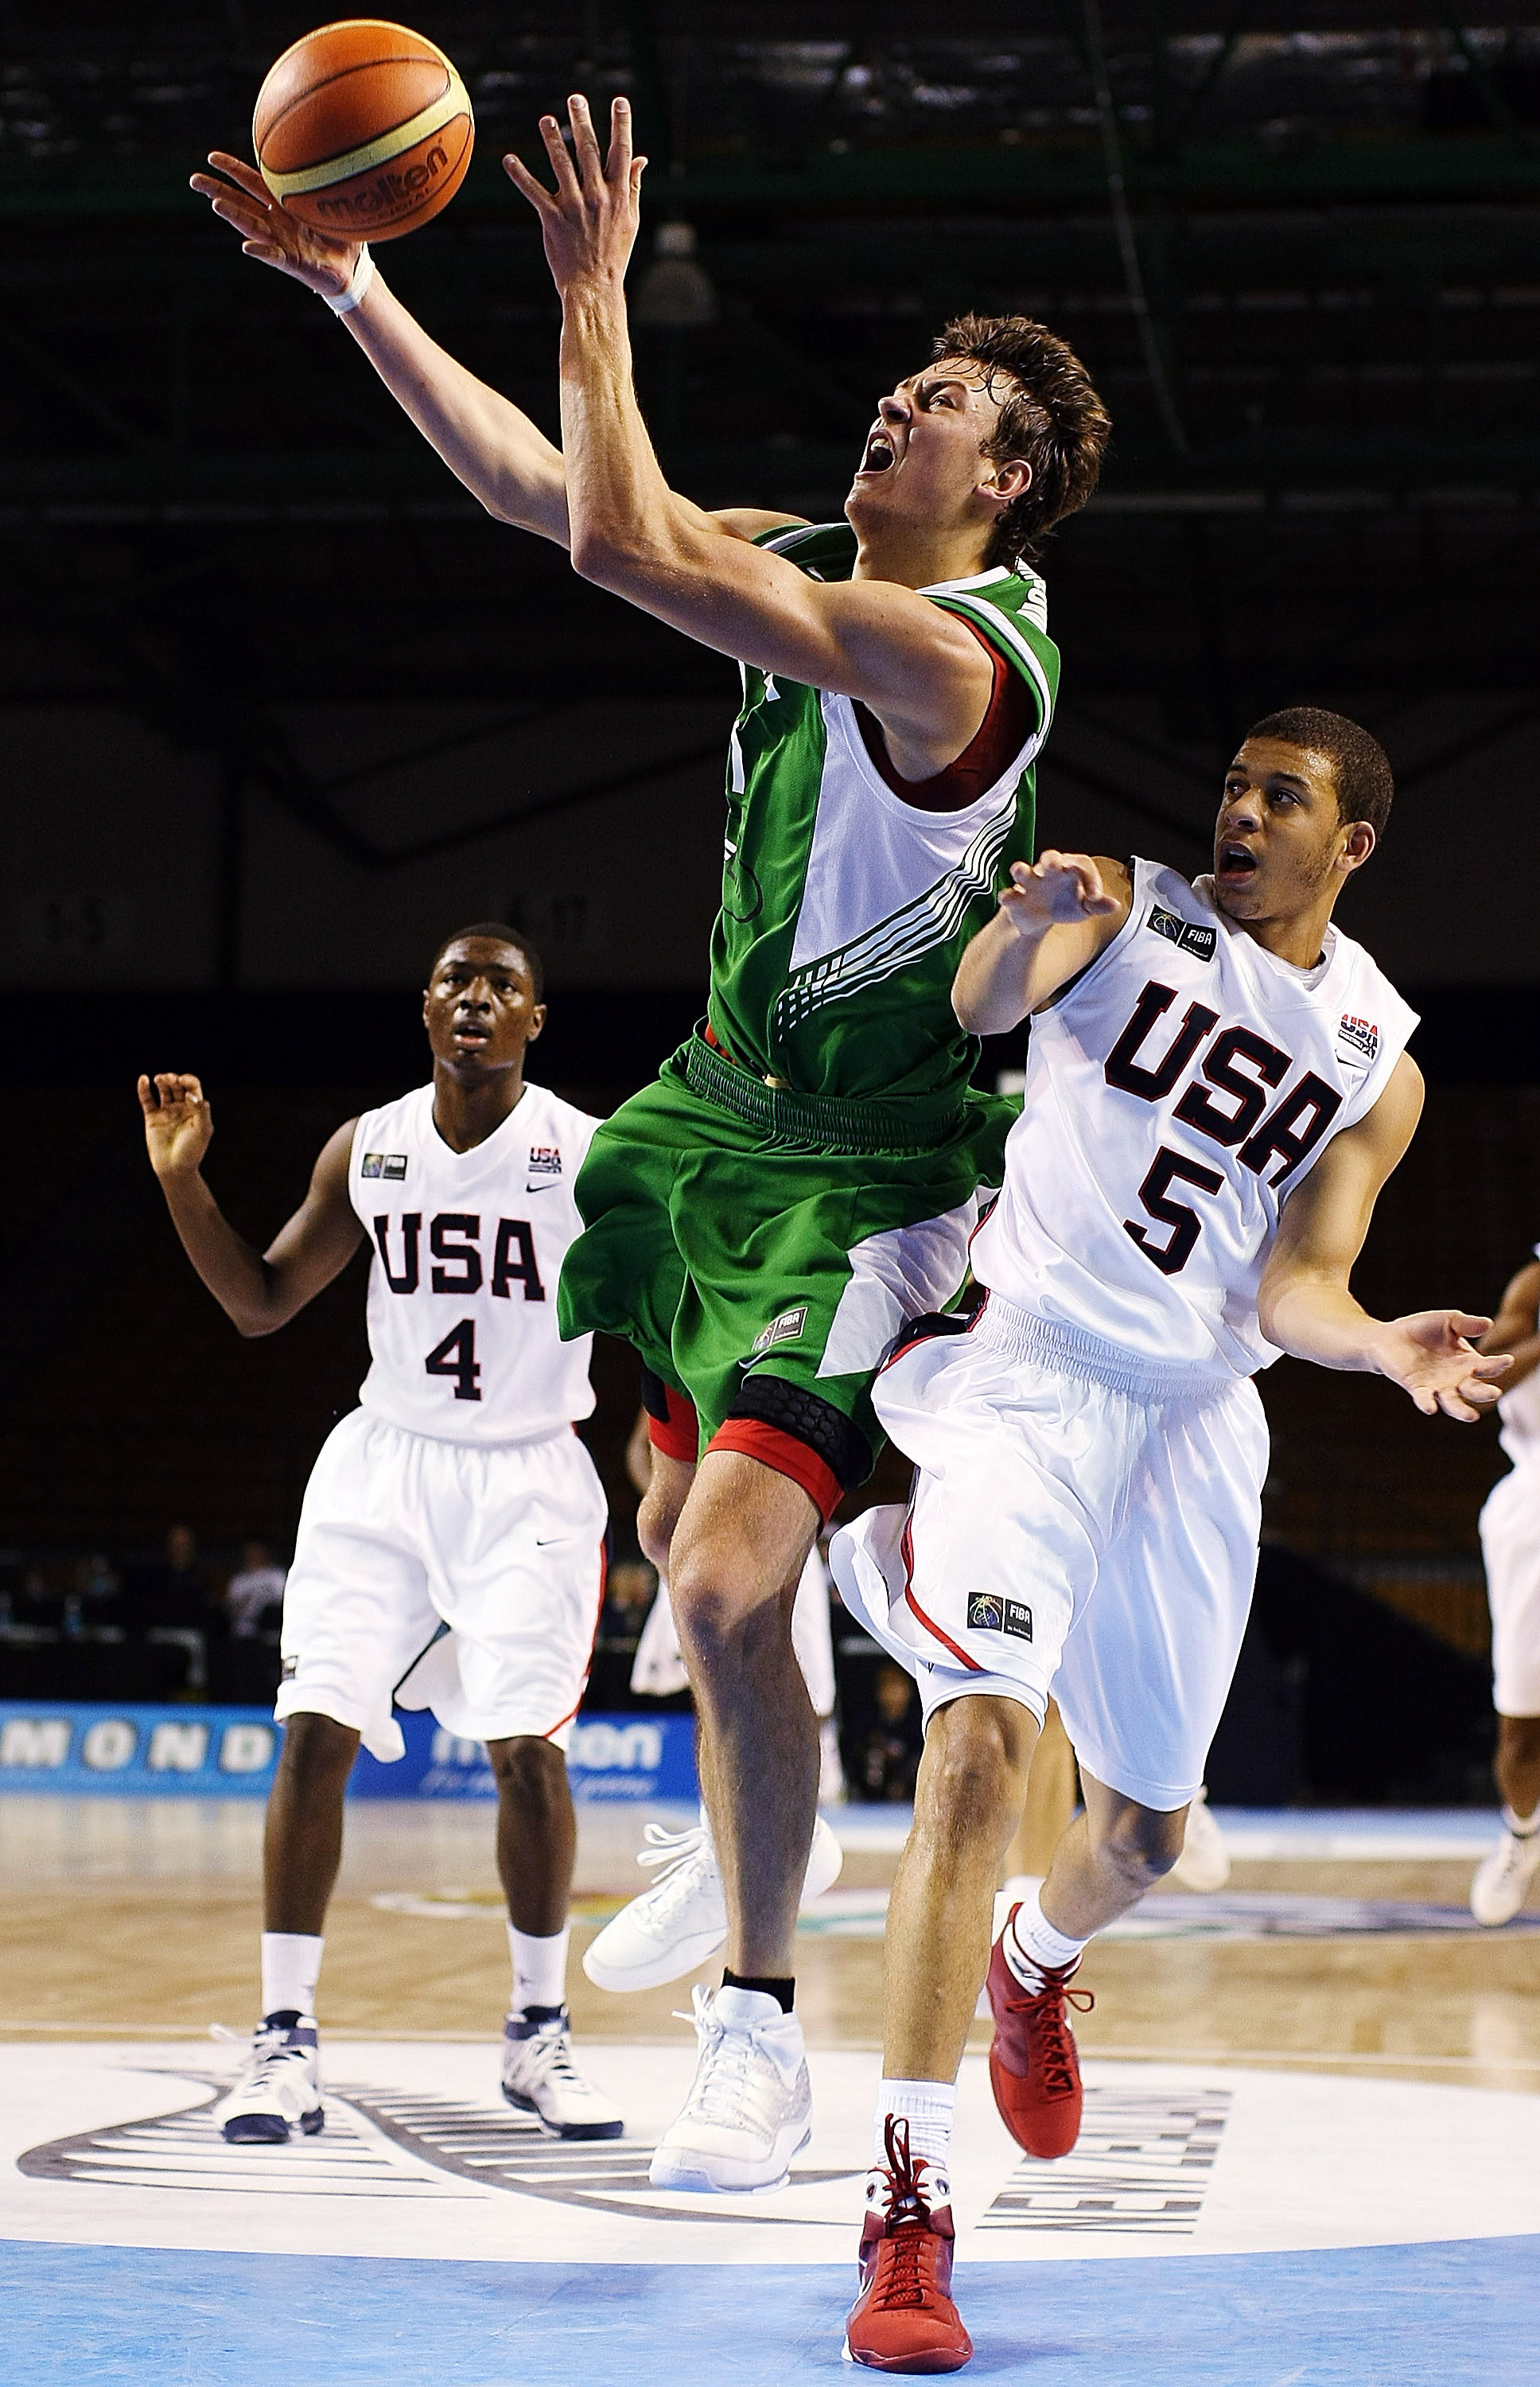 AUCKLAND, NEW ZEALAND - JULY 08:  Donatas Motiejunas of Lithuania takes the ball to the hoop as Seth Curry of the United States defends during the U19 Basketball World Championships match between the United States and Lithuania at North Shore Events Centr